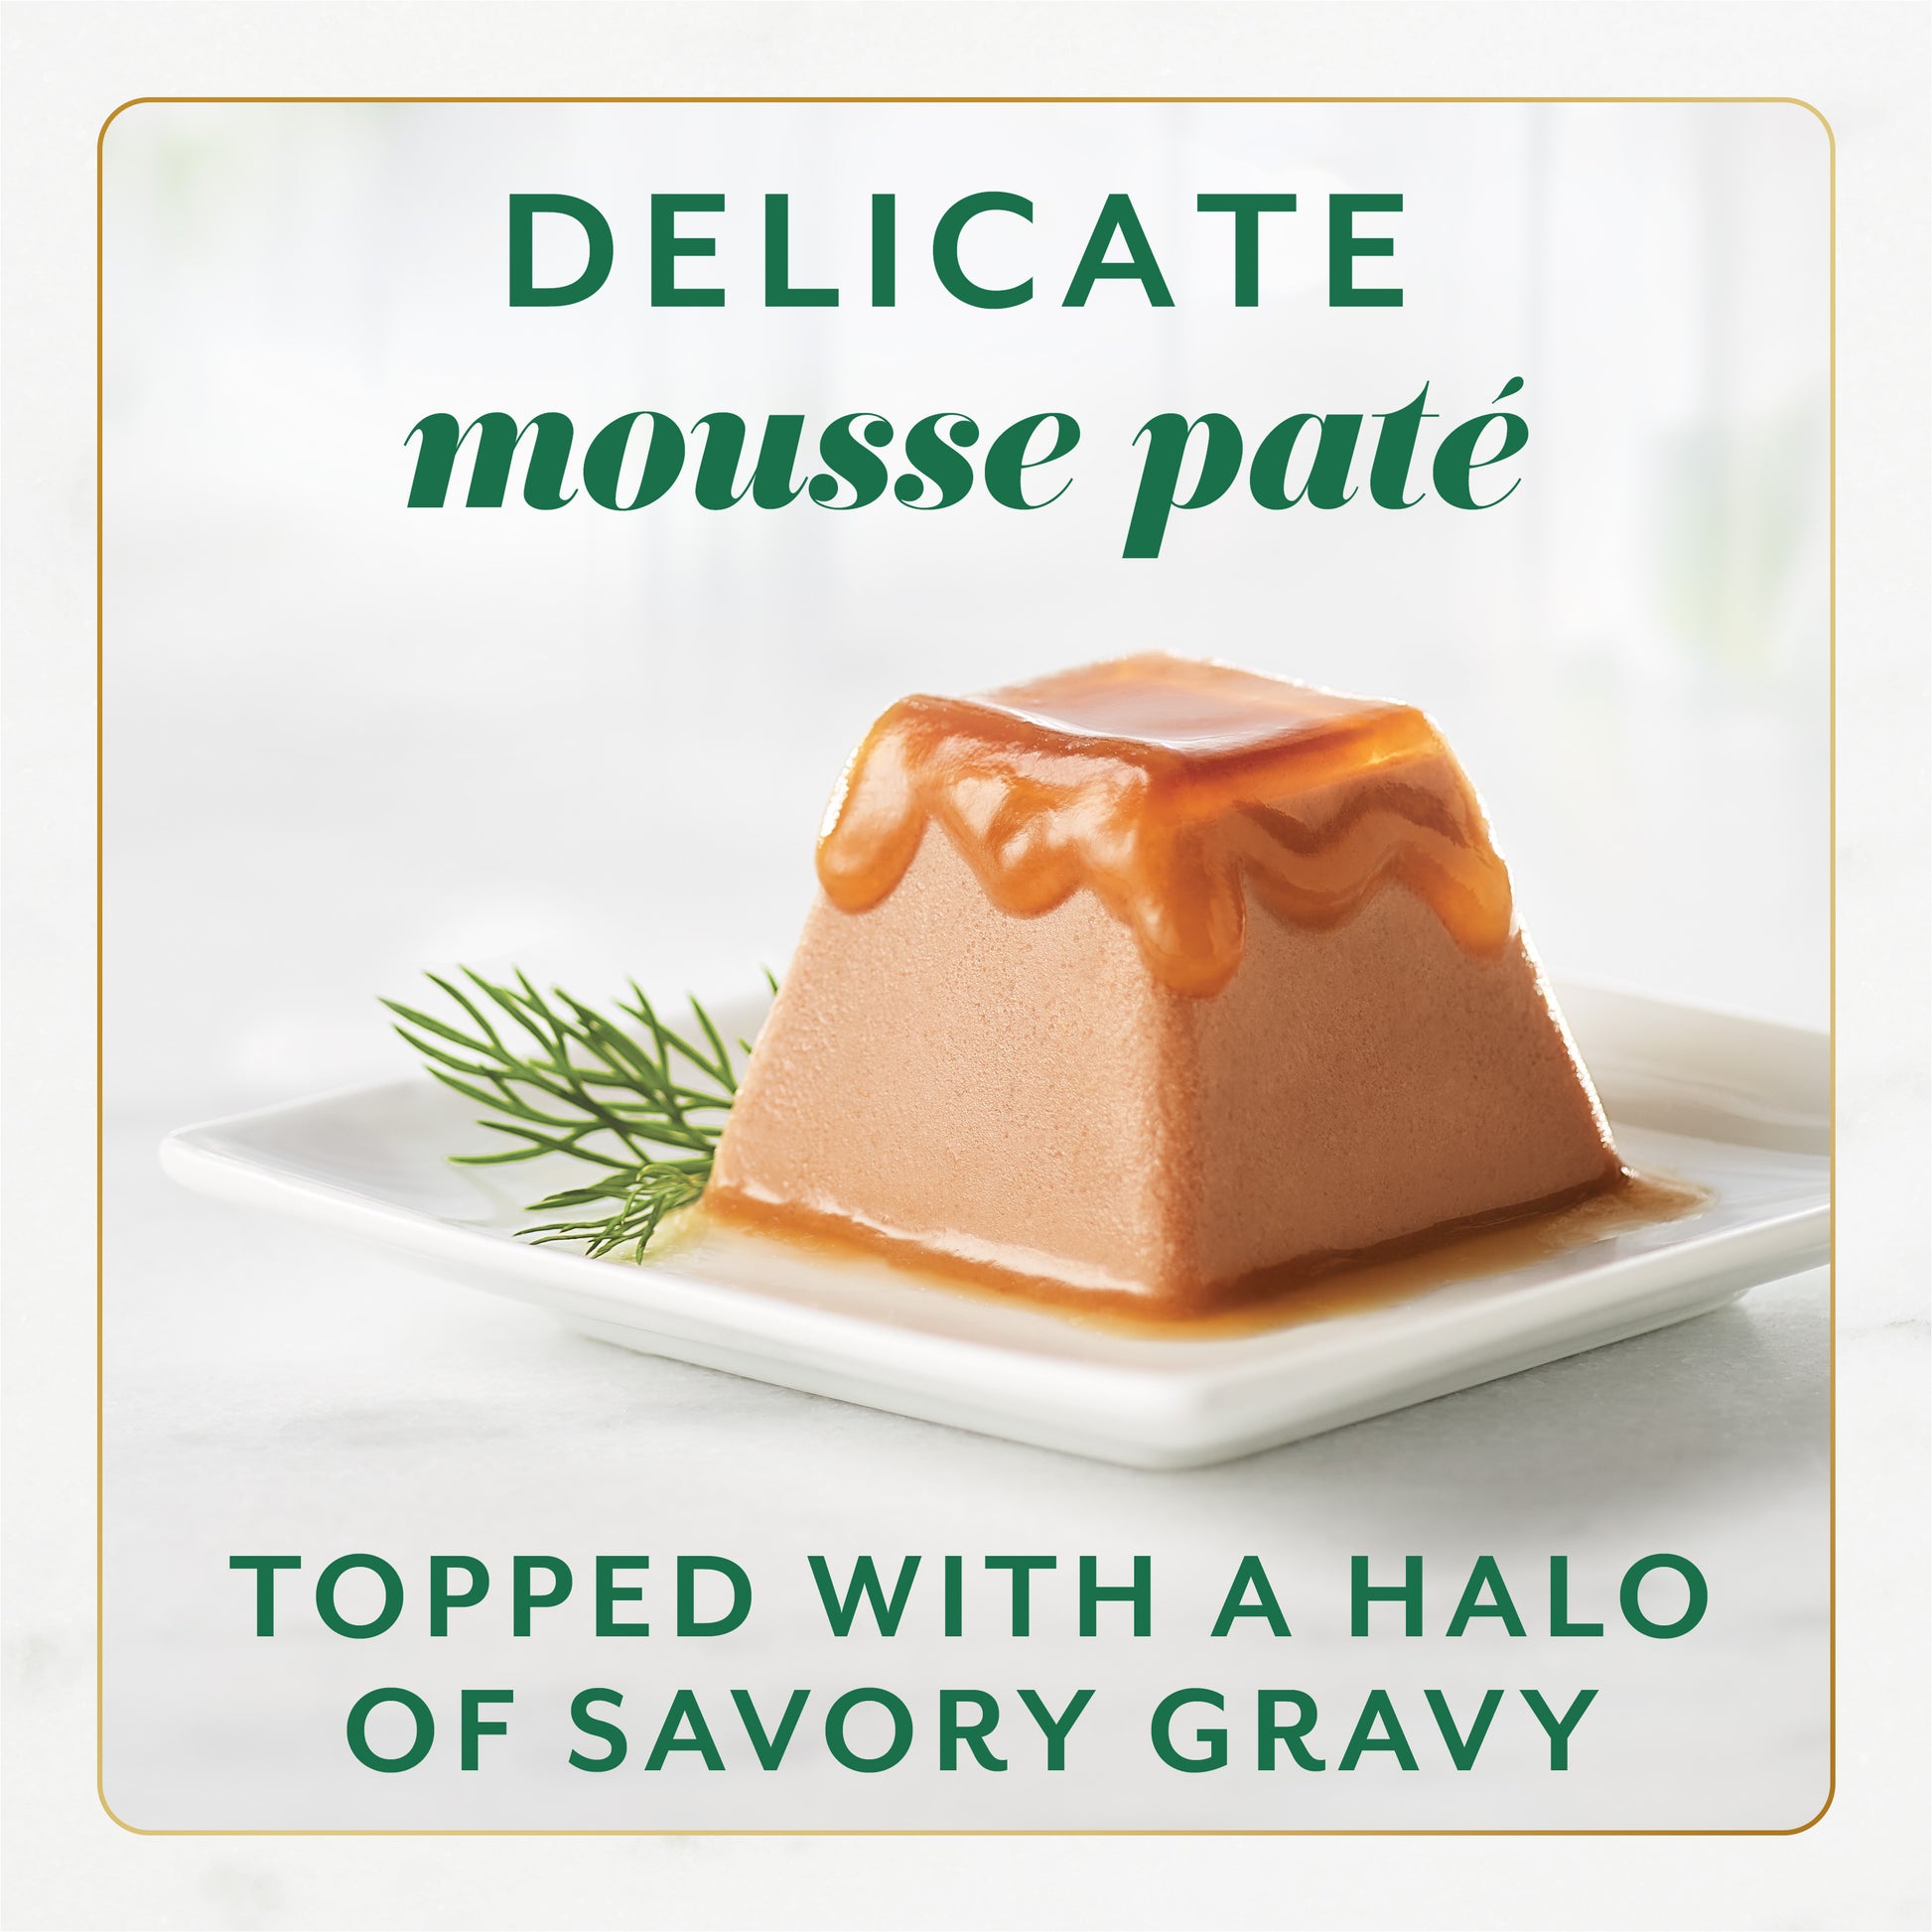 Delicate mousse pate topped with a halo of savory gravy